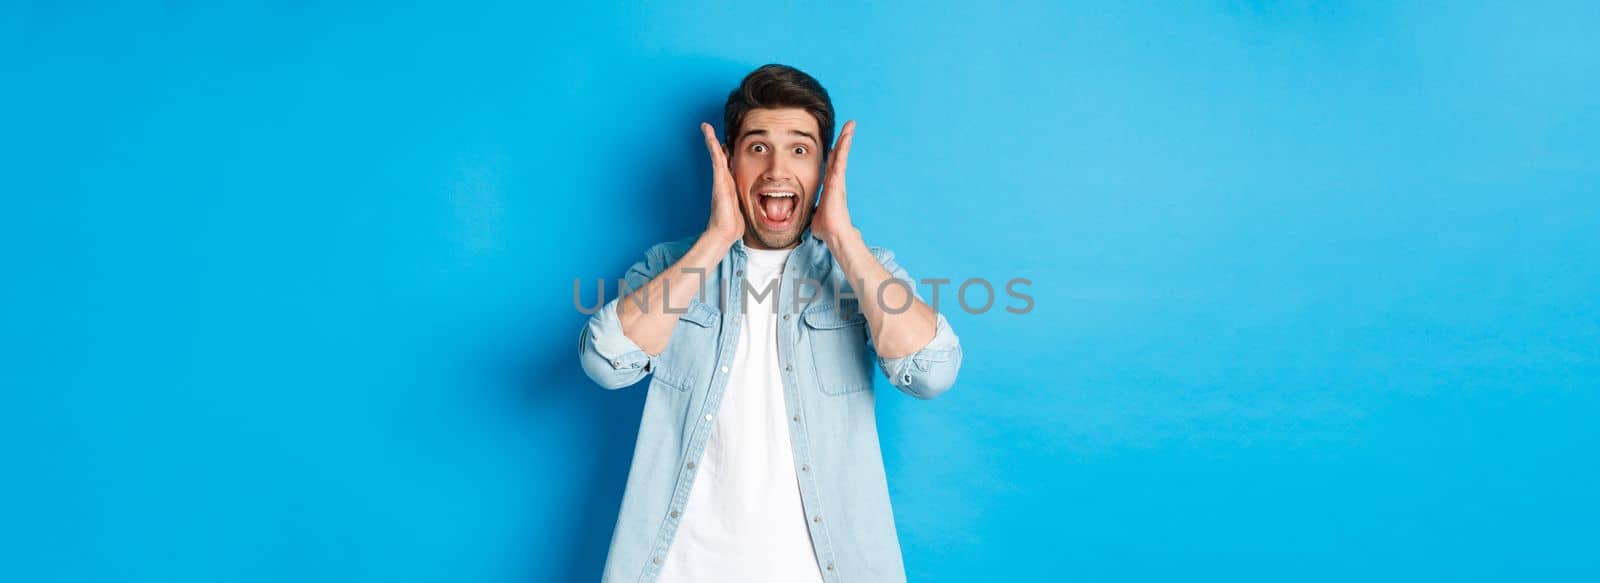 Scared man screaming and looking startled at something, standing against blue background.